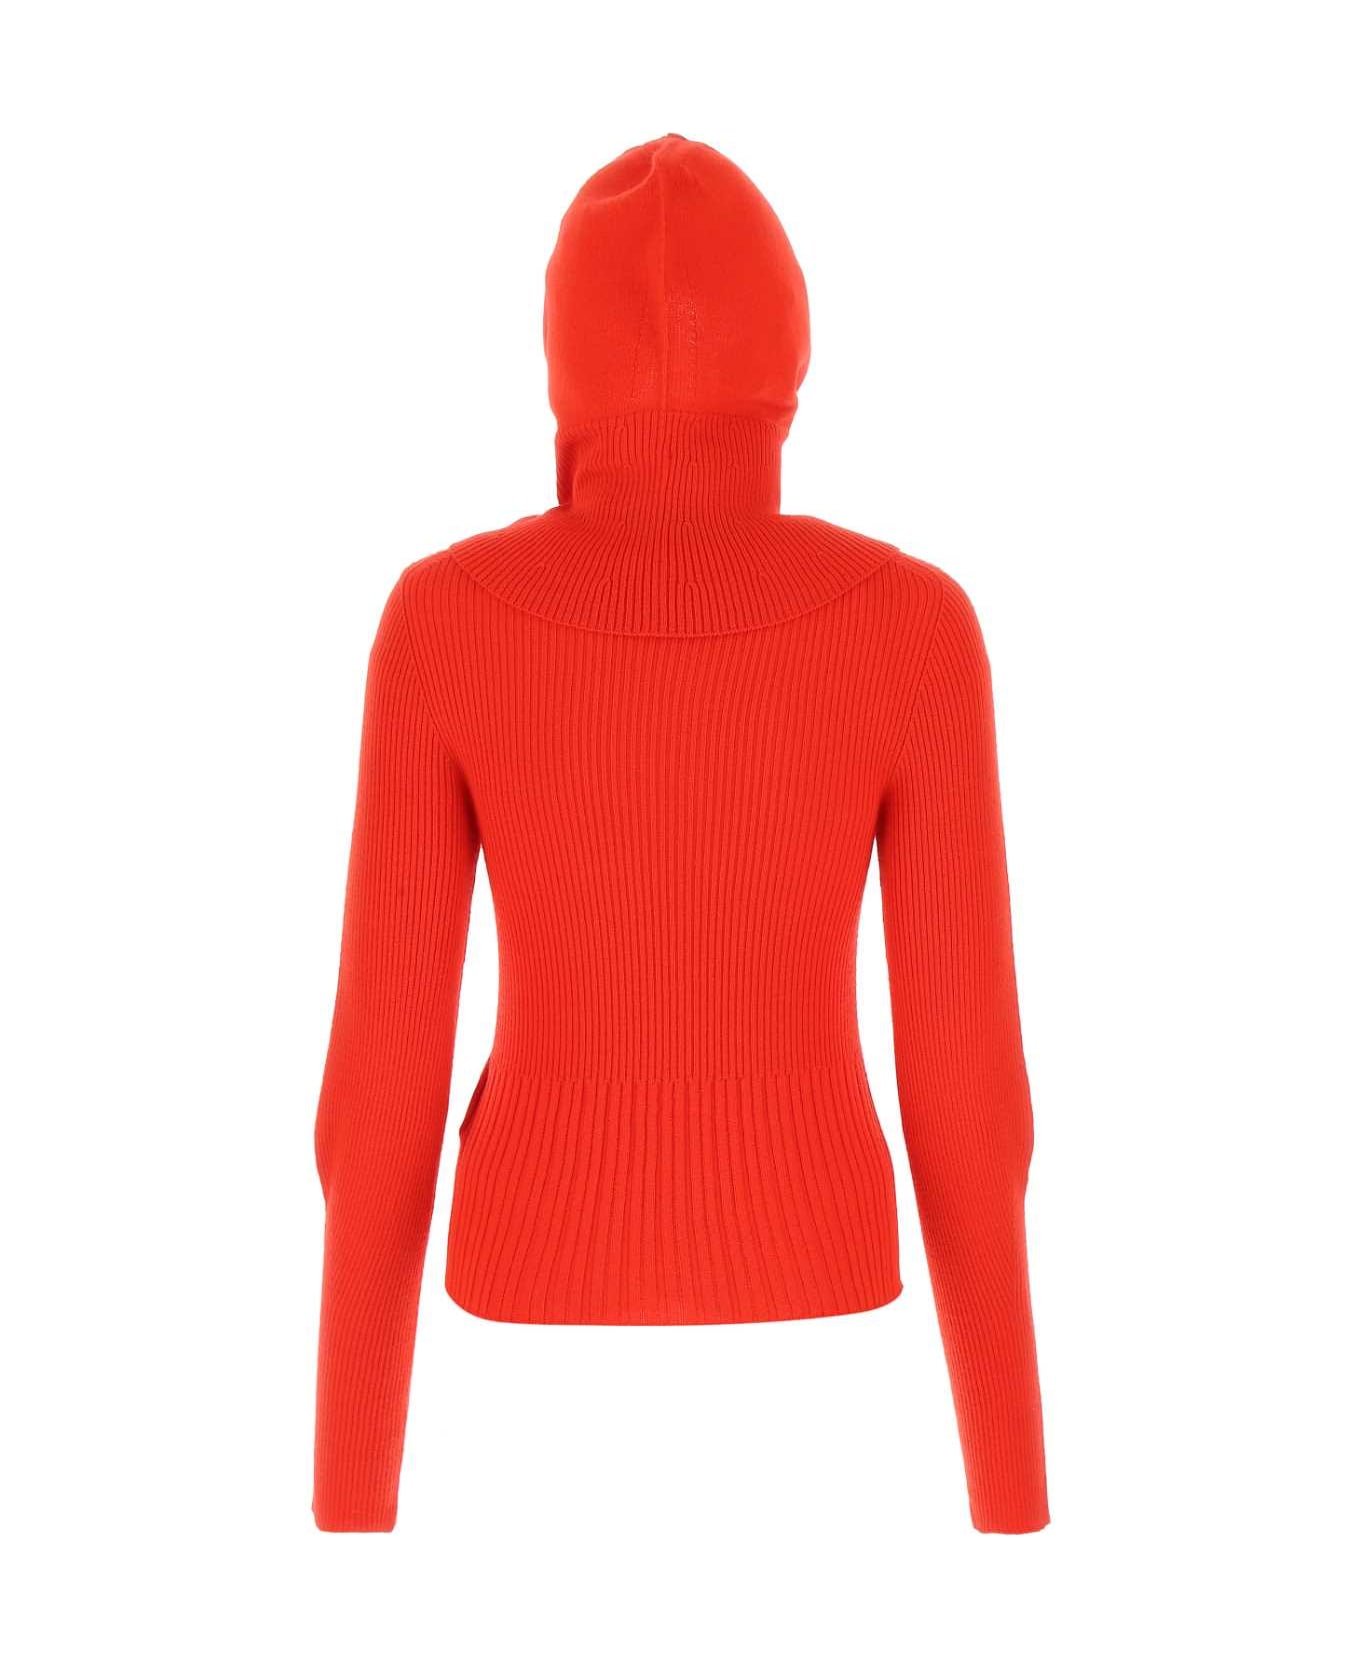 Low Classic Red Wool Sweater - 0374 ニットウェア